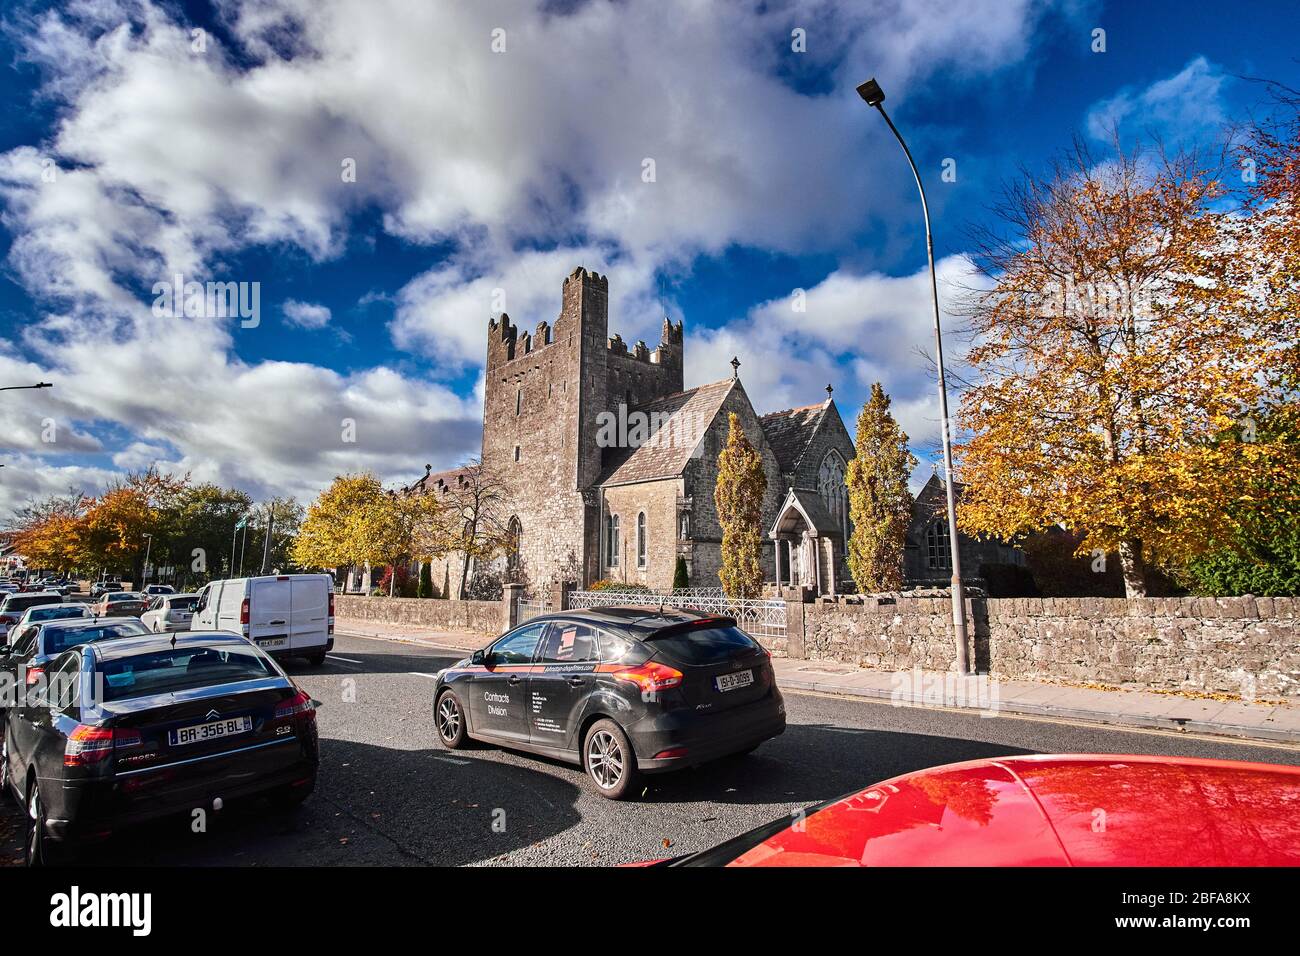 Street view of the Holy Trinity Abbey Church, Adare, Co. Limerick in October autumn with cars driving on busy road Stock Photo